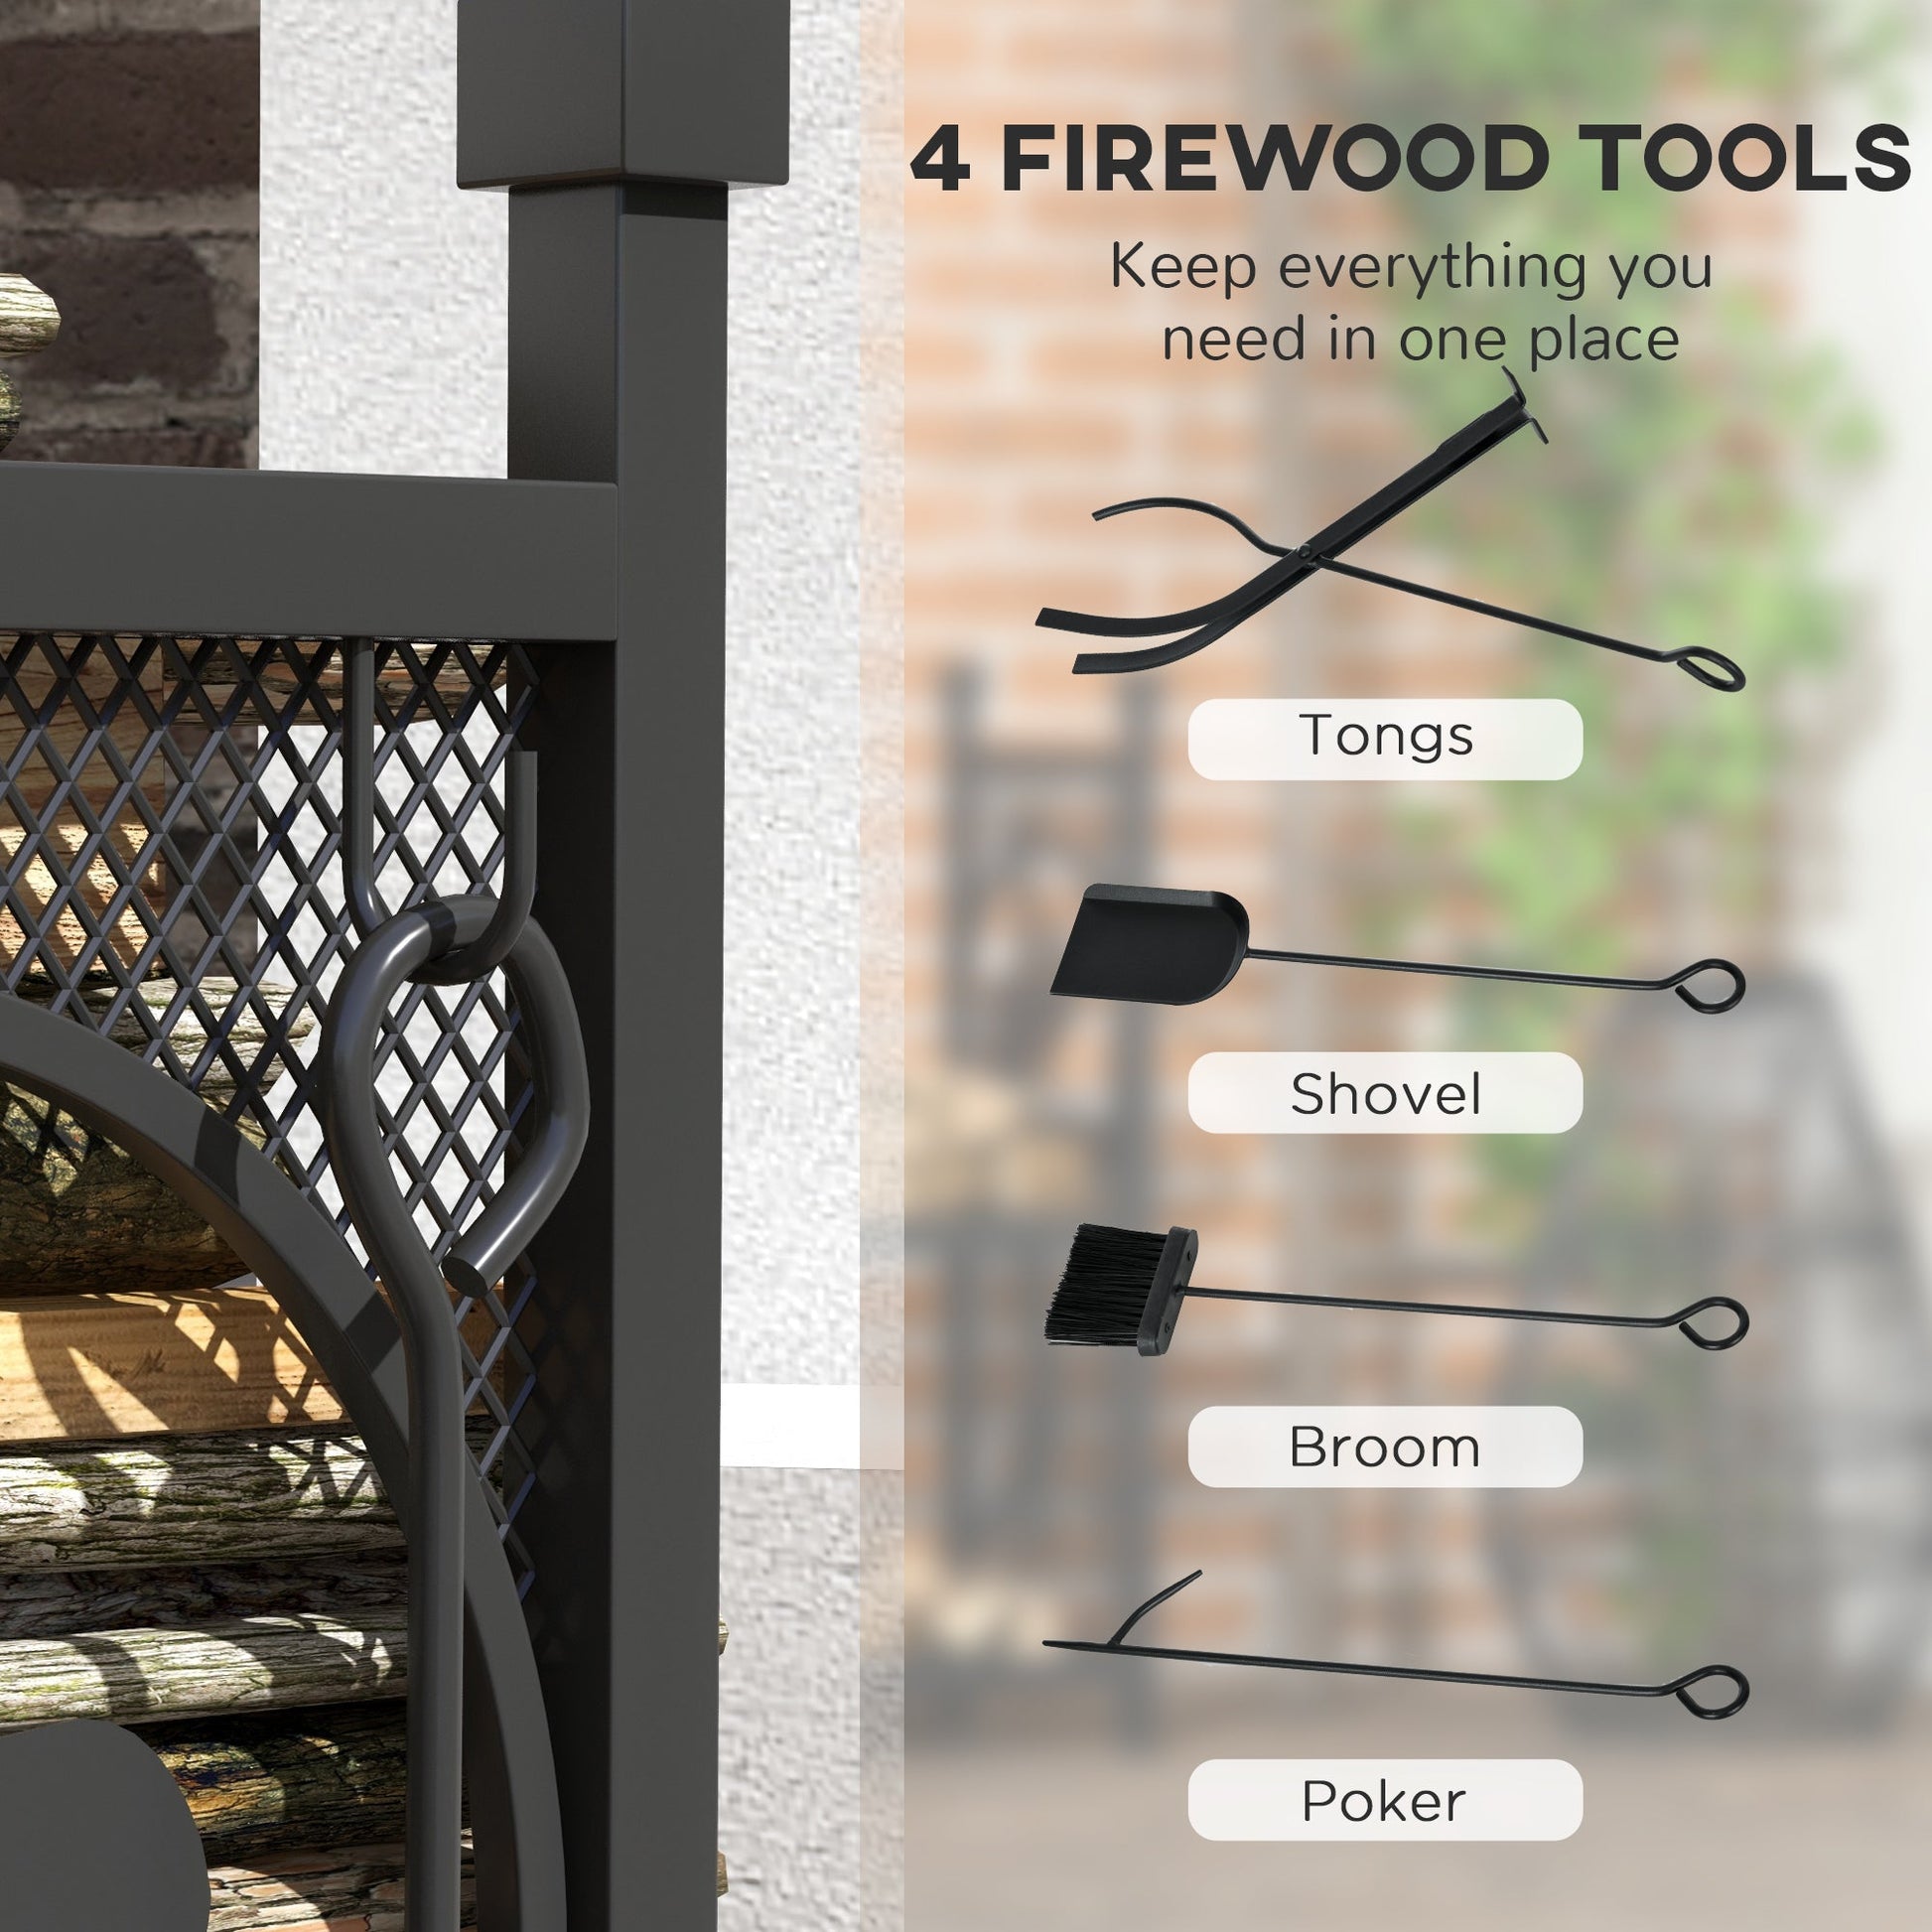 2-Tier Firewood Rack with Shovel, Broom, Poker, Tongs, Side Hooks, Log Holder for Fireplace, Outdoor Indoor Wood Storage Stacker, 21.7" x 12.6" x 30.3", Black at Gallery Canada